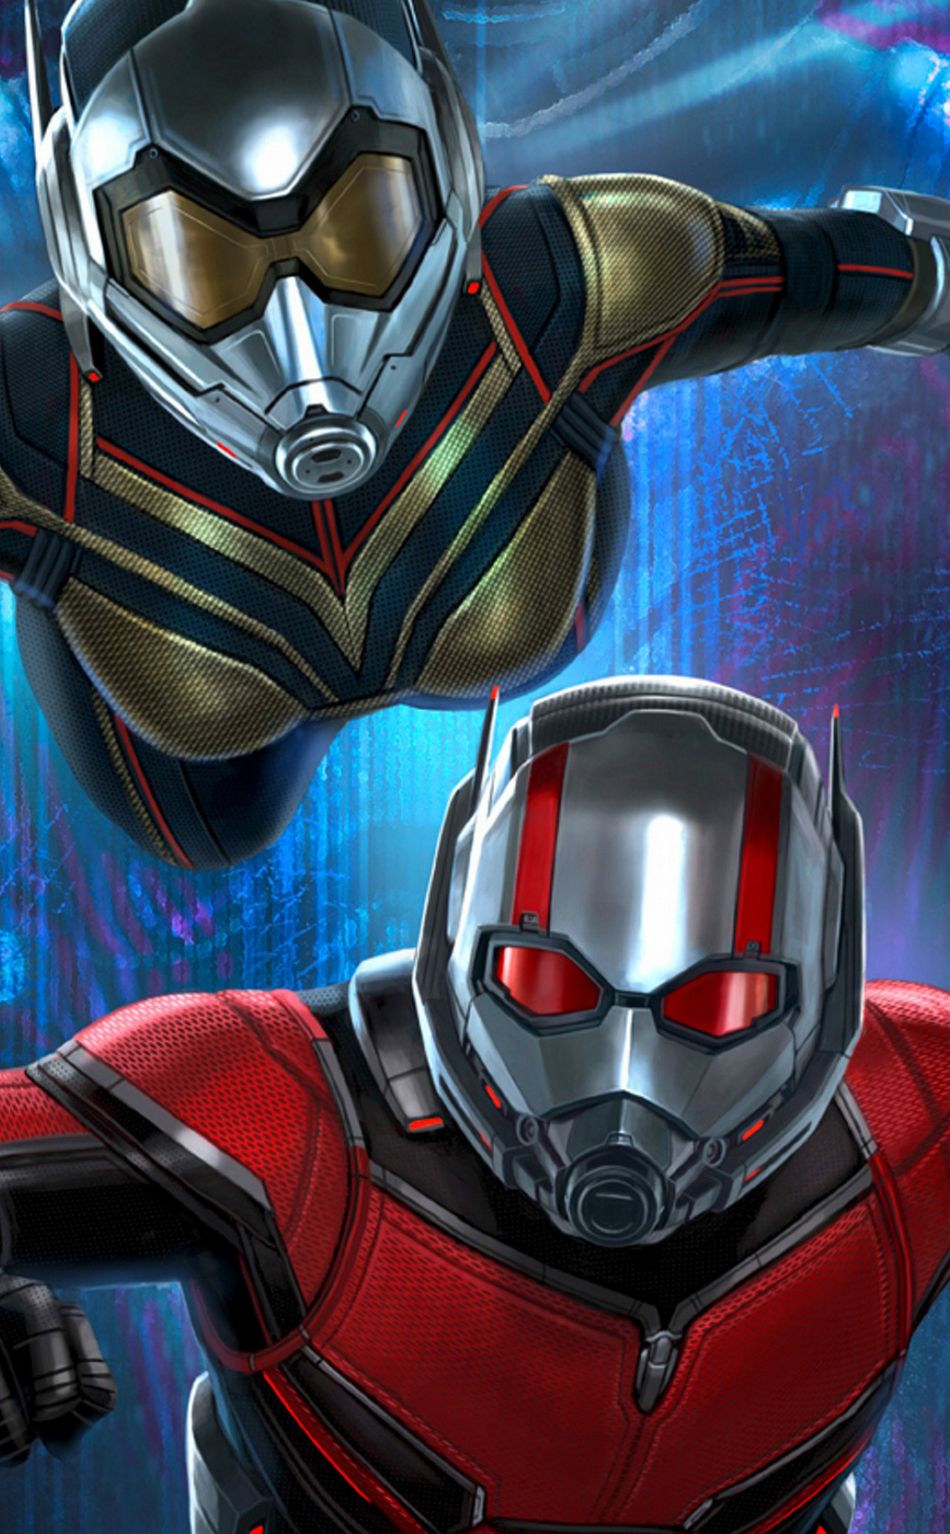 Download 950x1534 Wallpaper Ant Man And The Wasp, Empire Magazine, Movie, Iphone, 950x1534 HD Image, Background, 9225